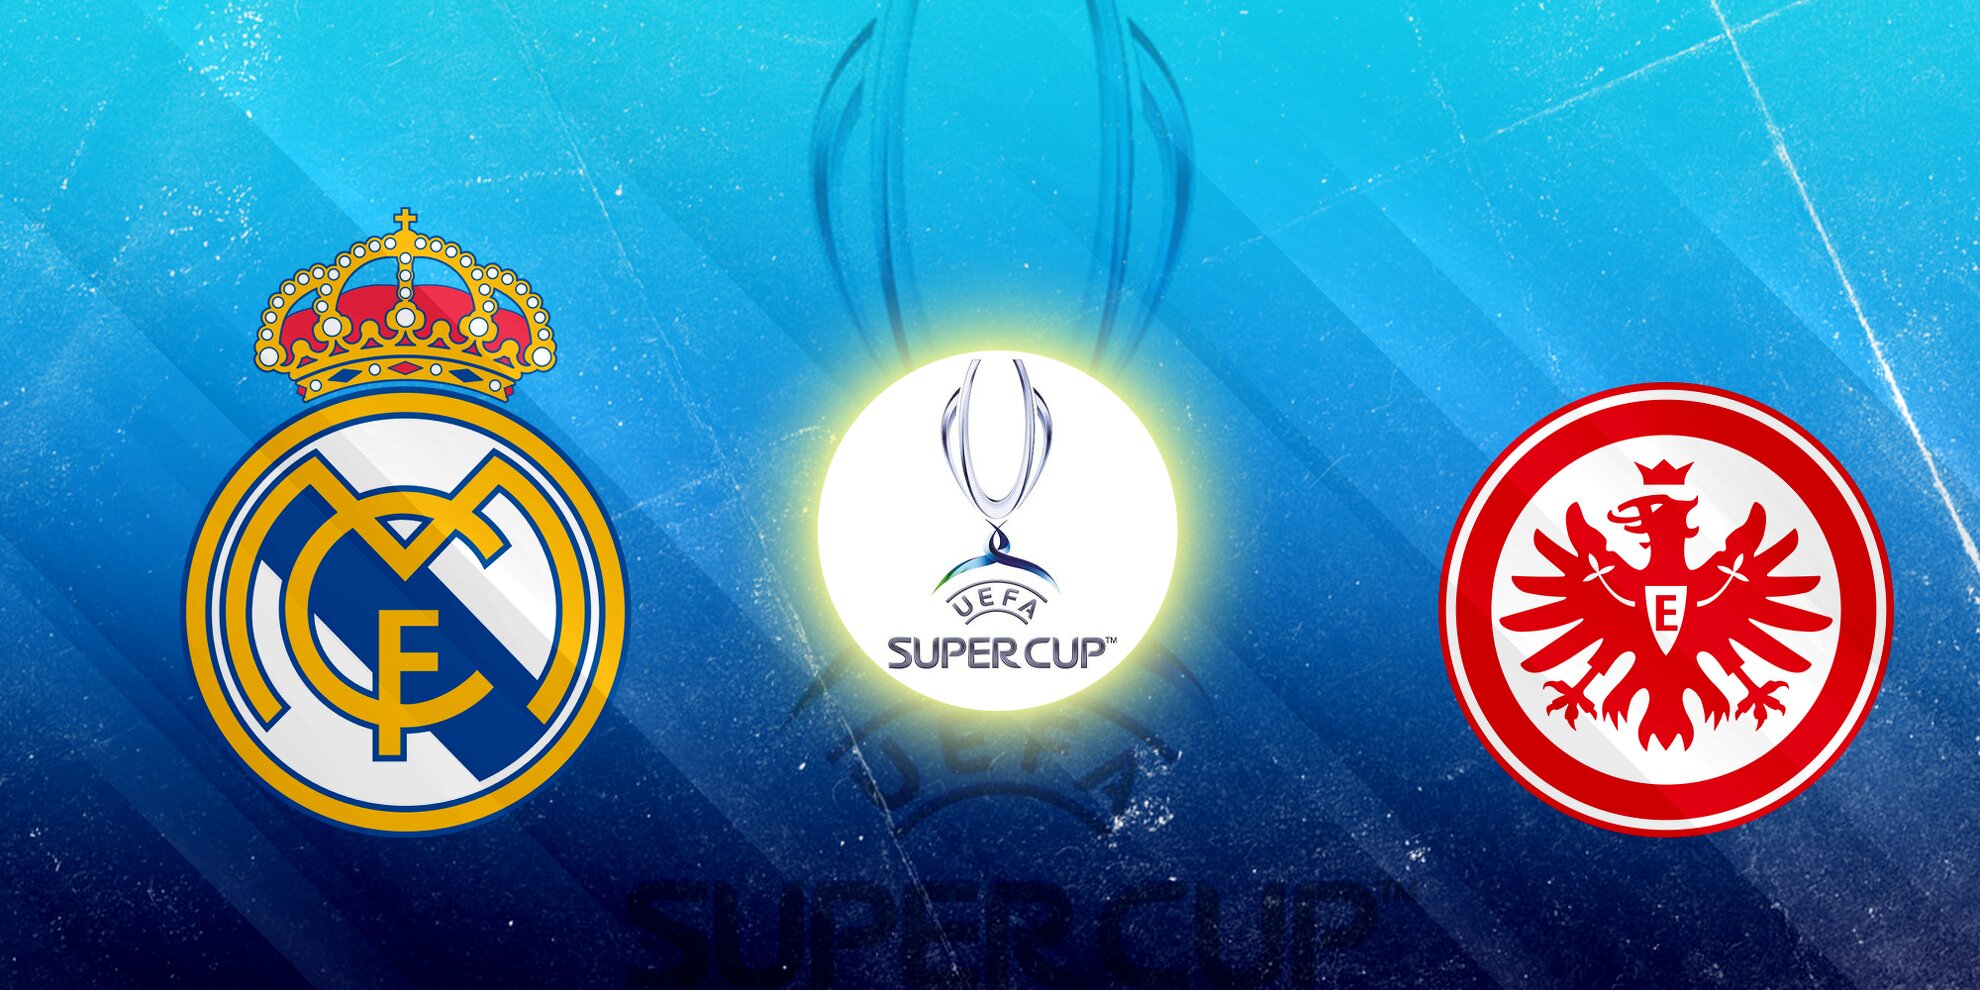 2022 UEFA Super Cup: predicted lineup, injury news, head-to-head